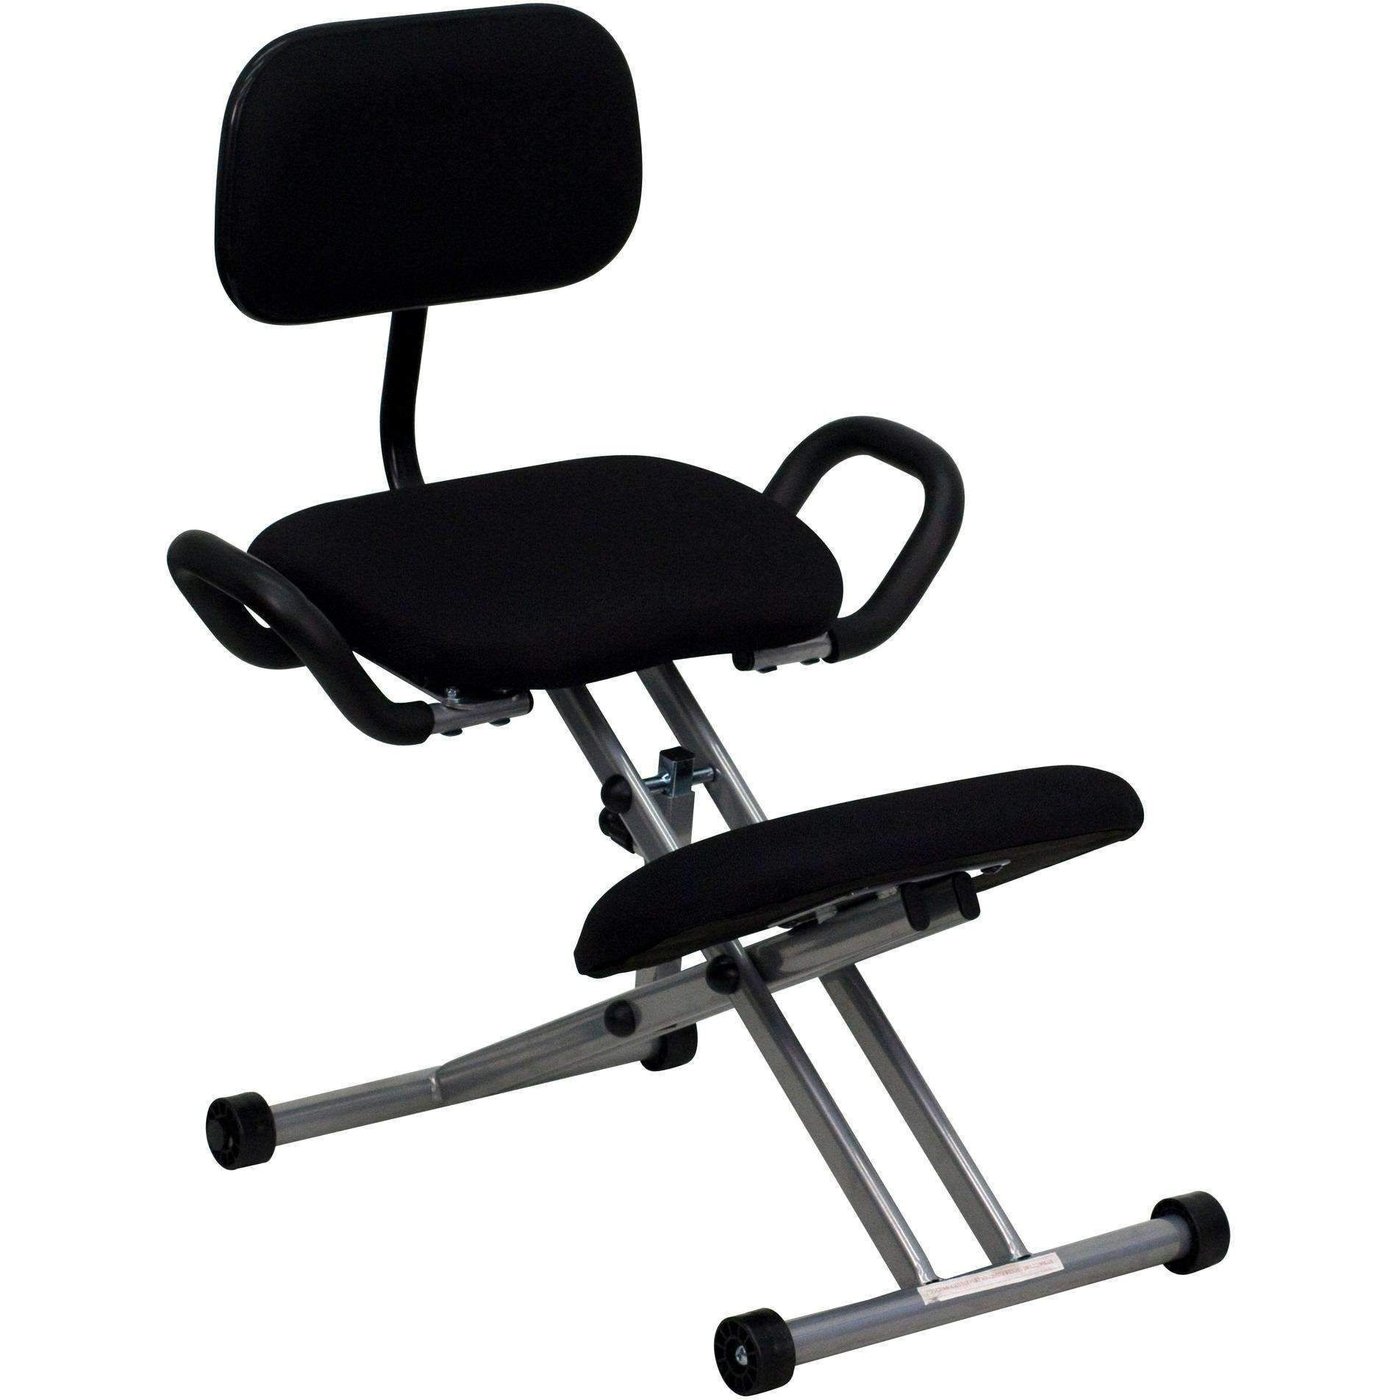 How To Choose A Kneeling Chair - Foter